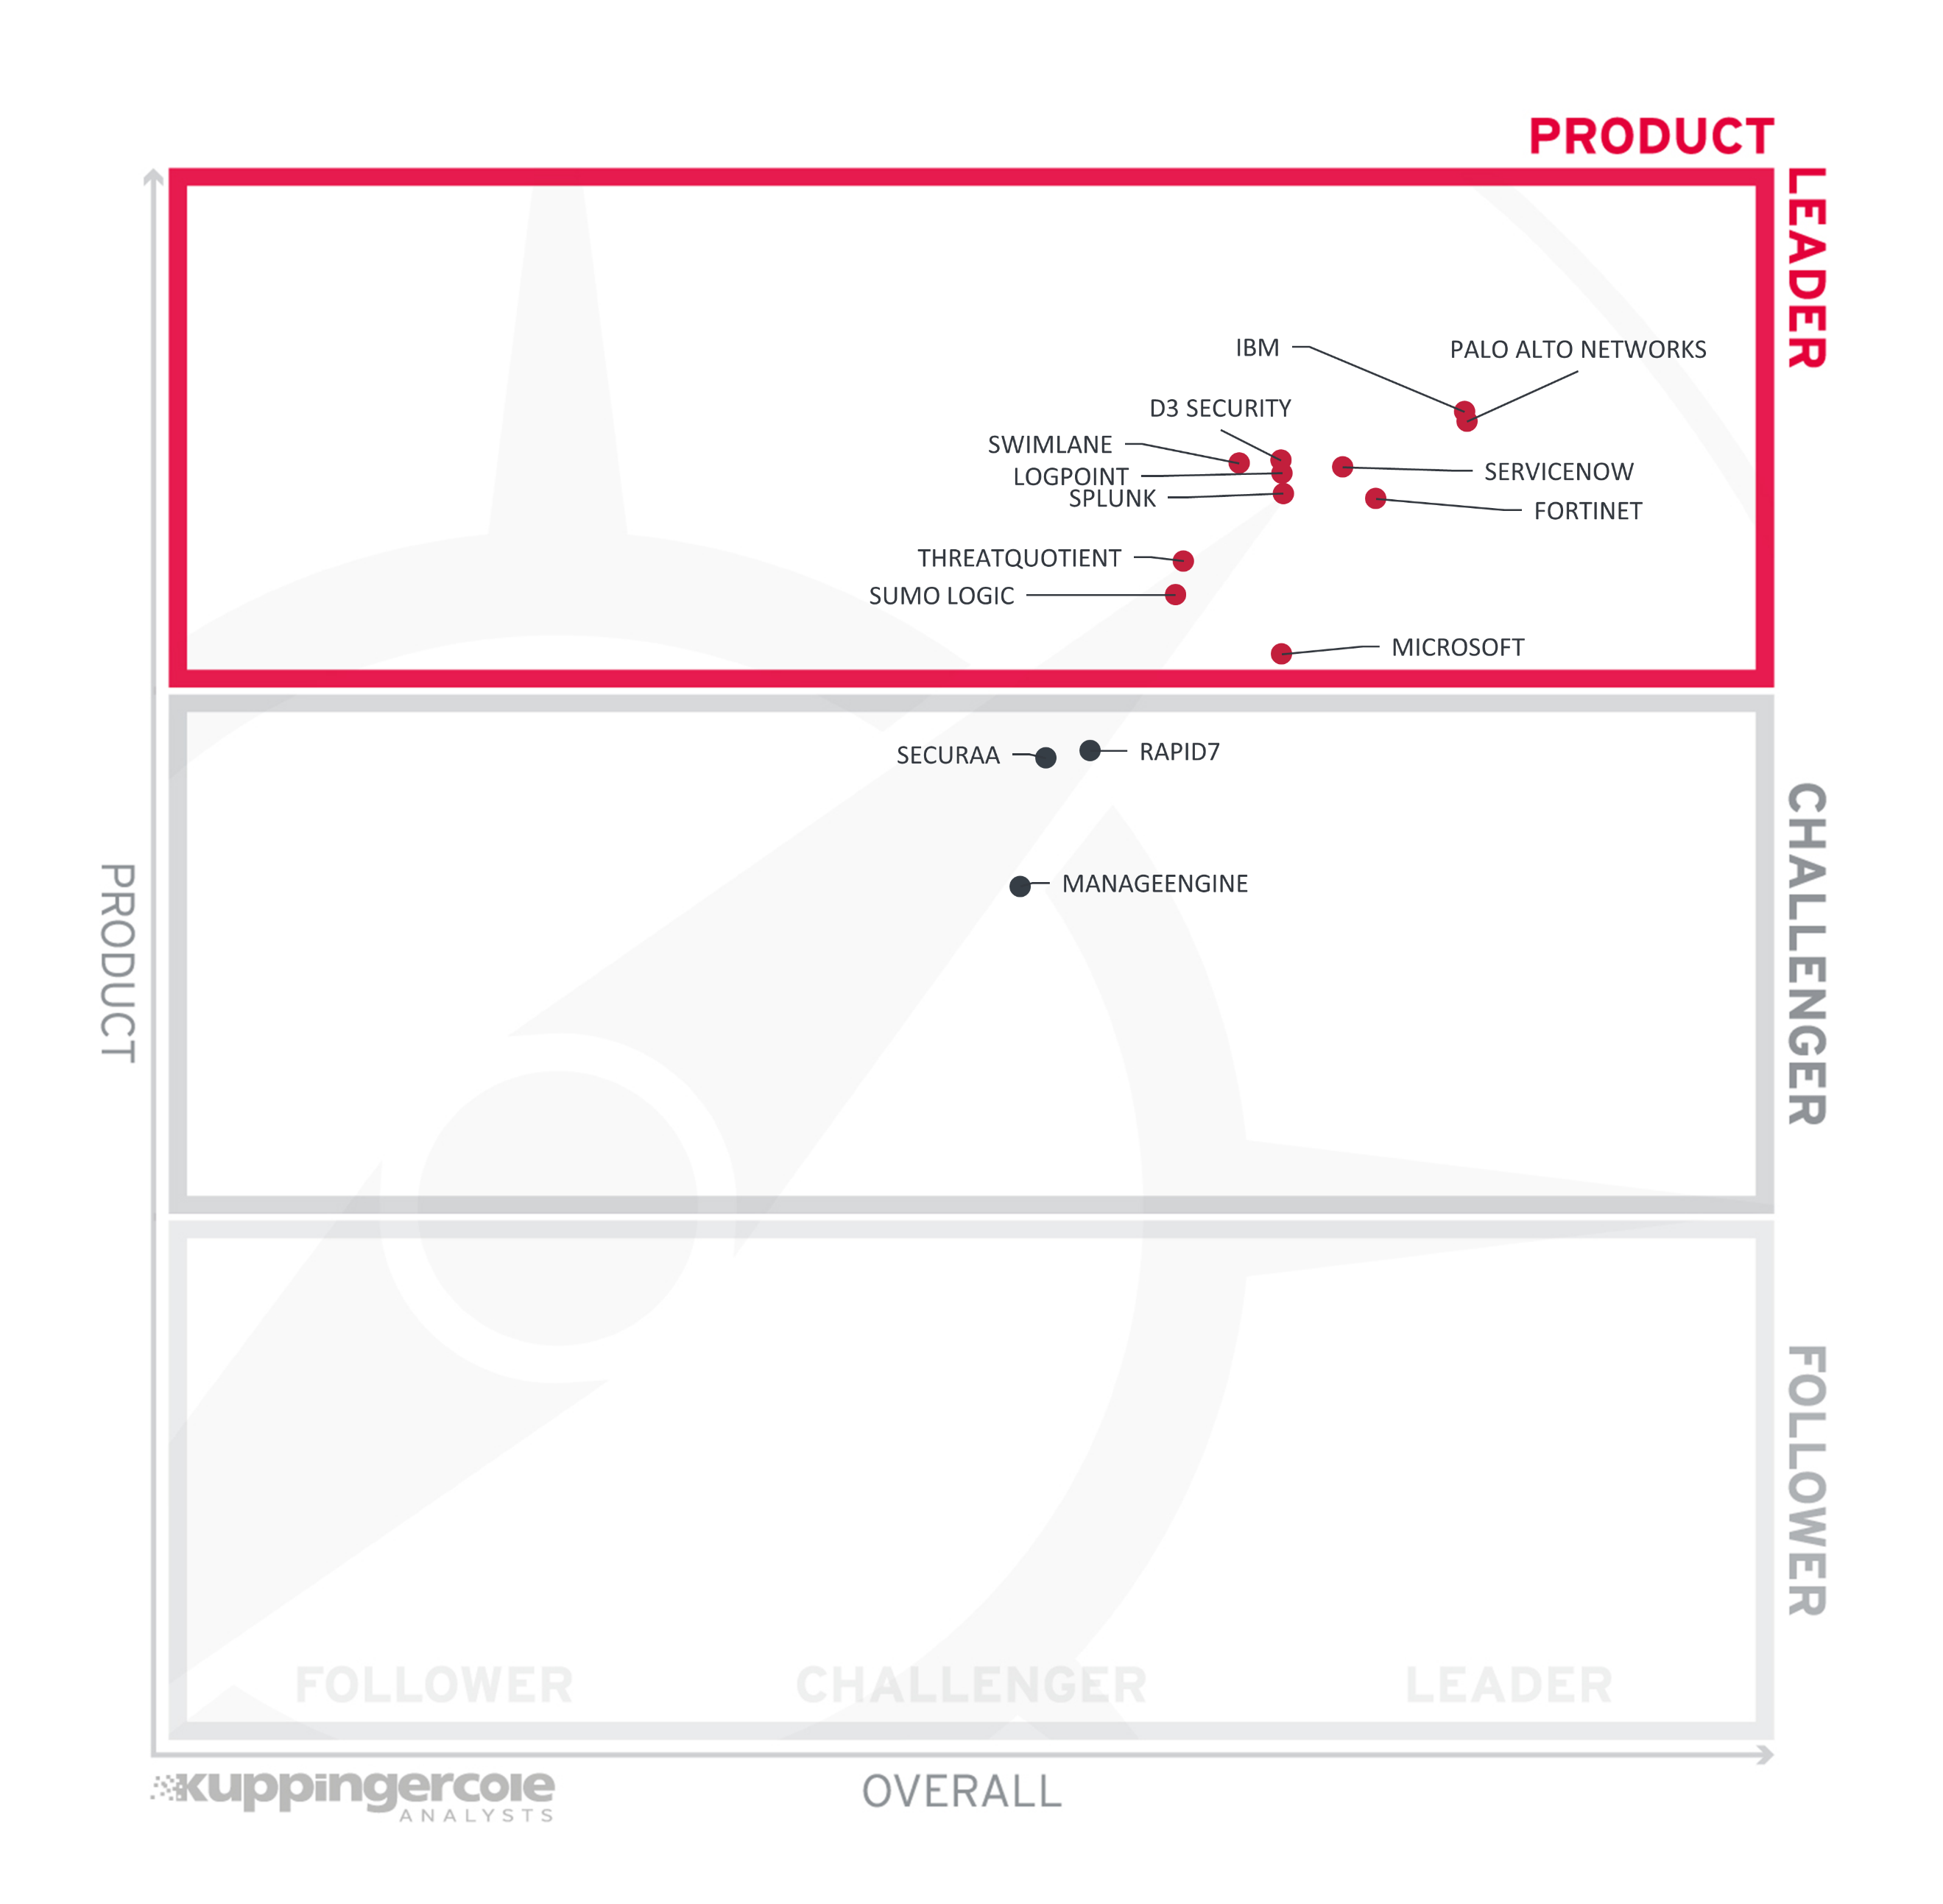 The Product Leaders in the Leadership Compass SOAR